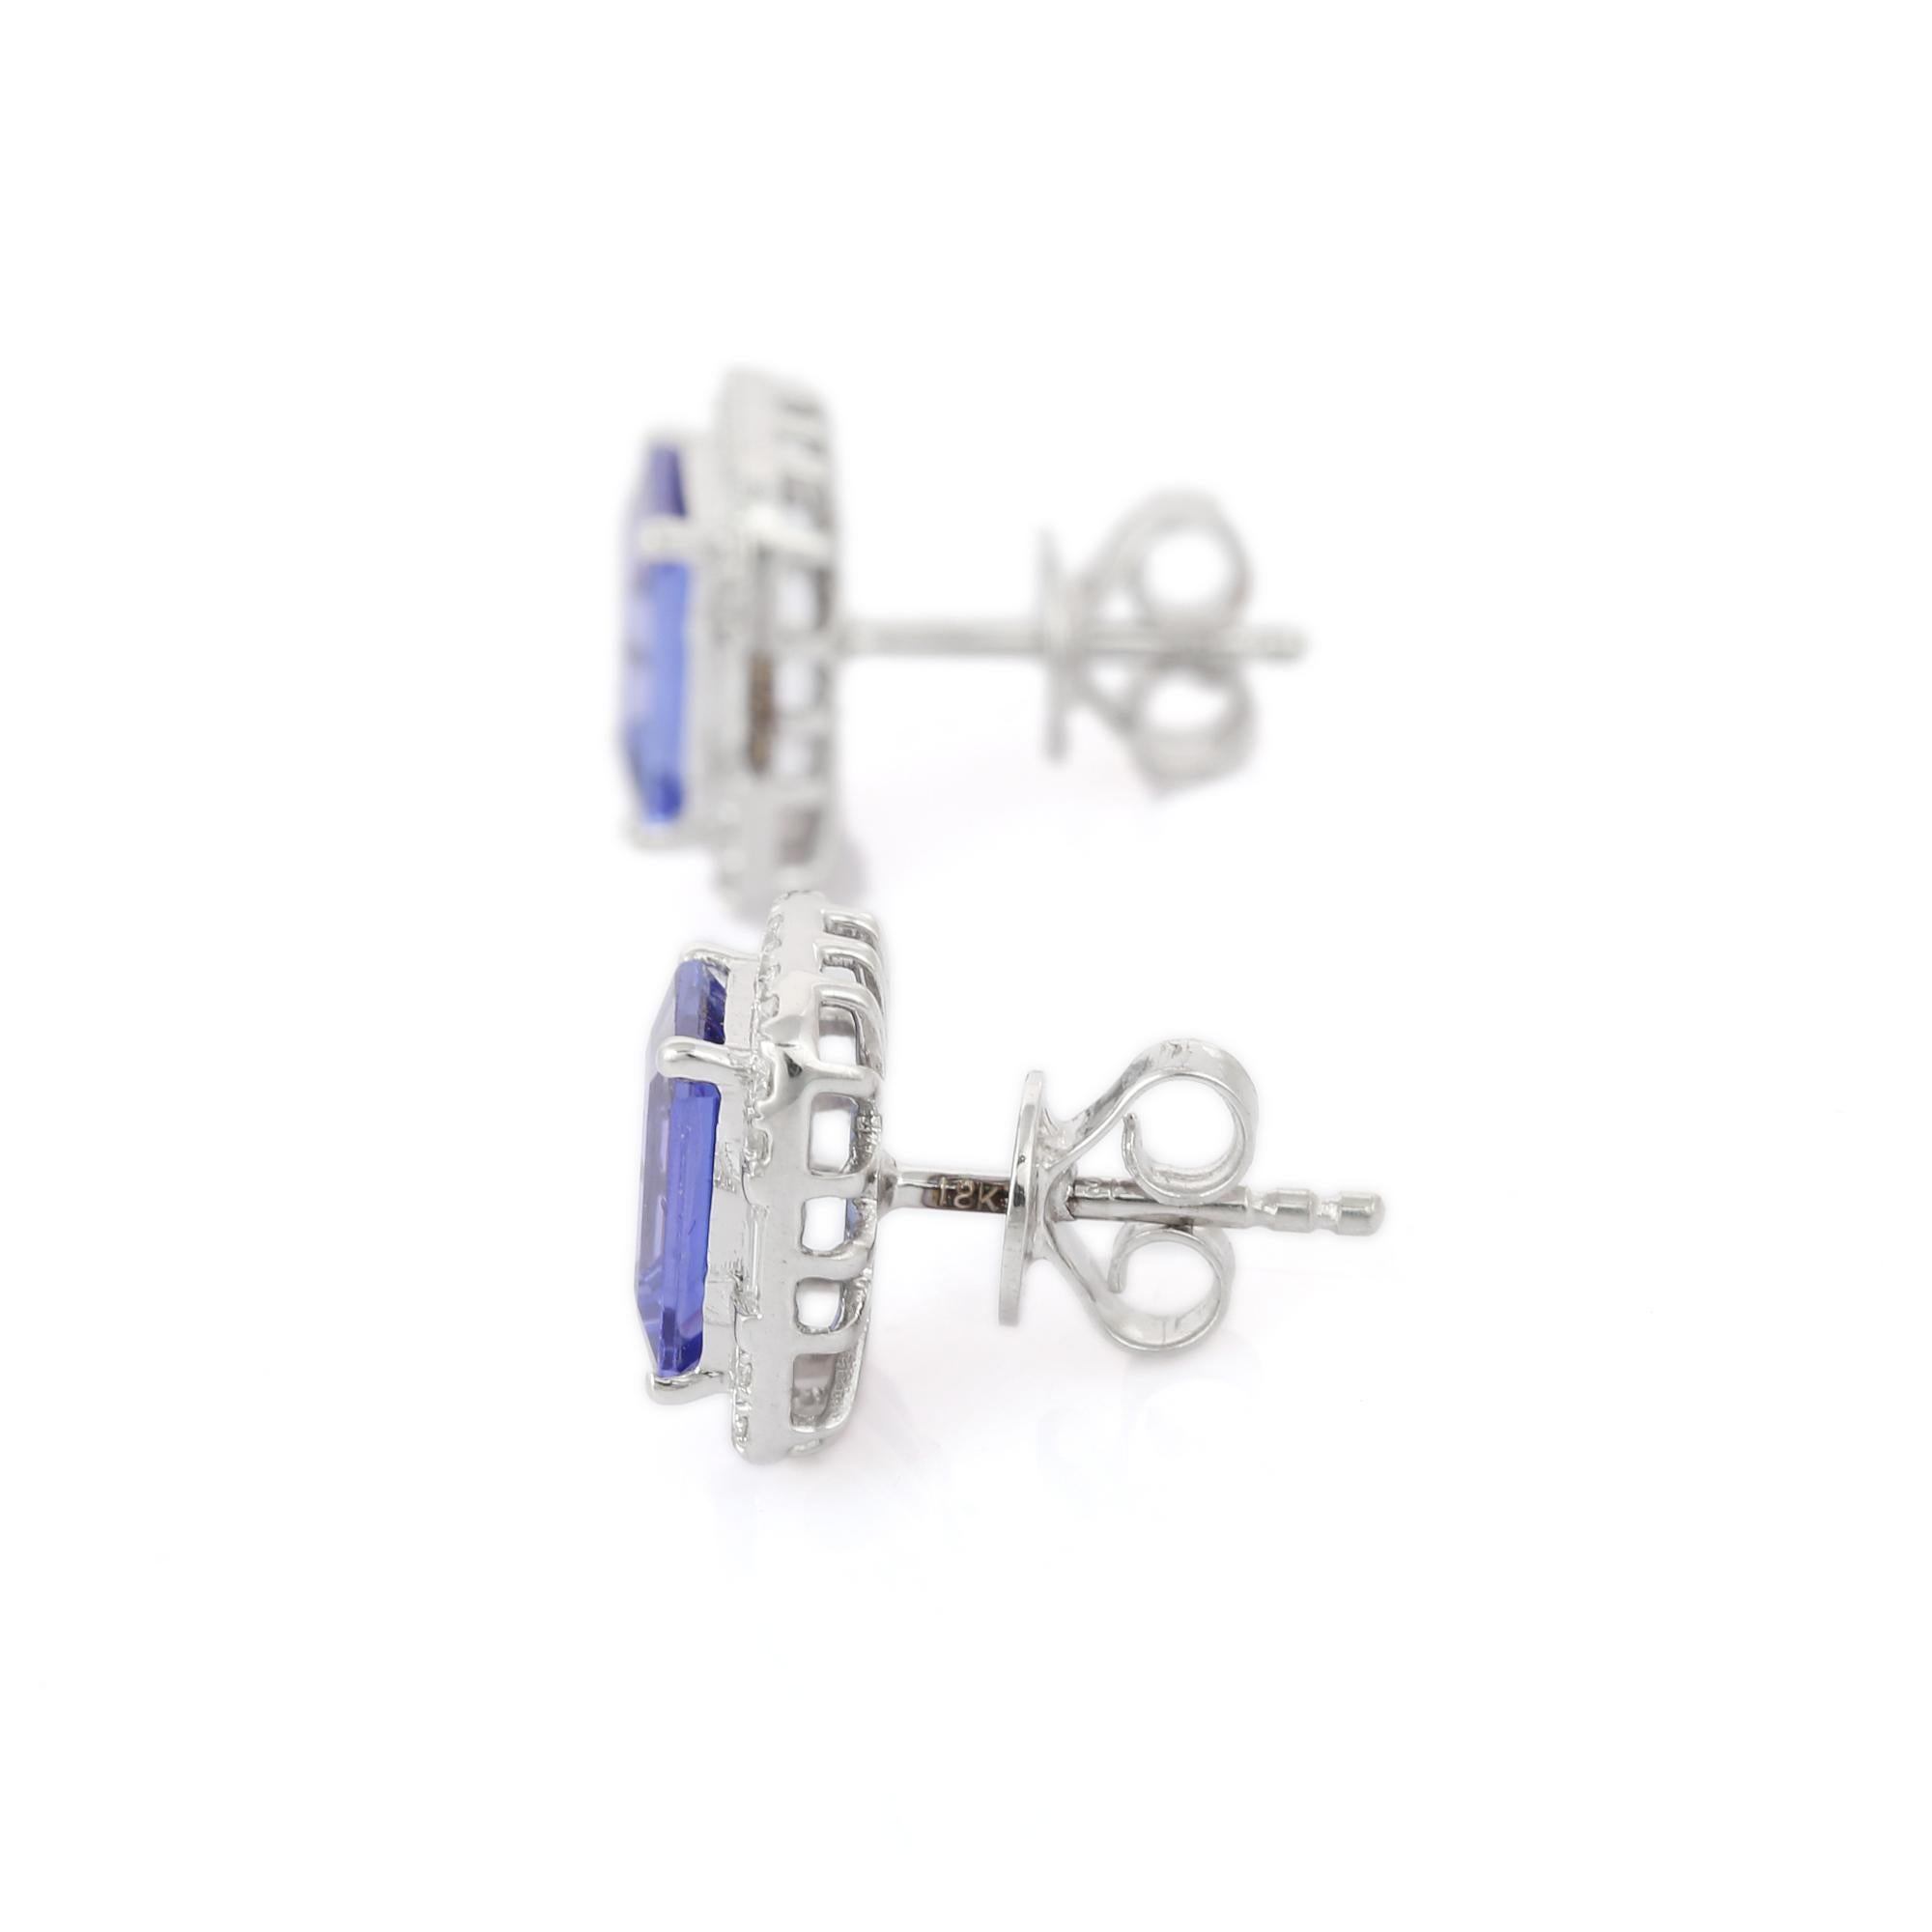 2.85 Carat Natural Tanzanite and Diamond Stud Earrings in 18K White Gold For Sale 1